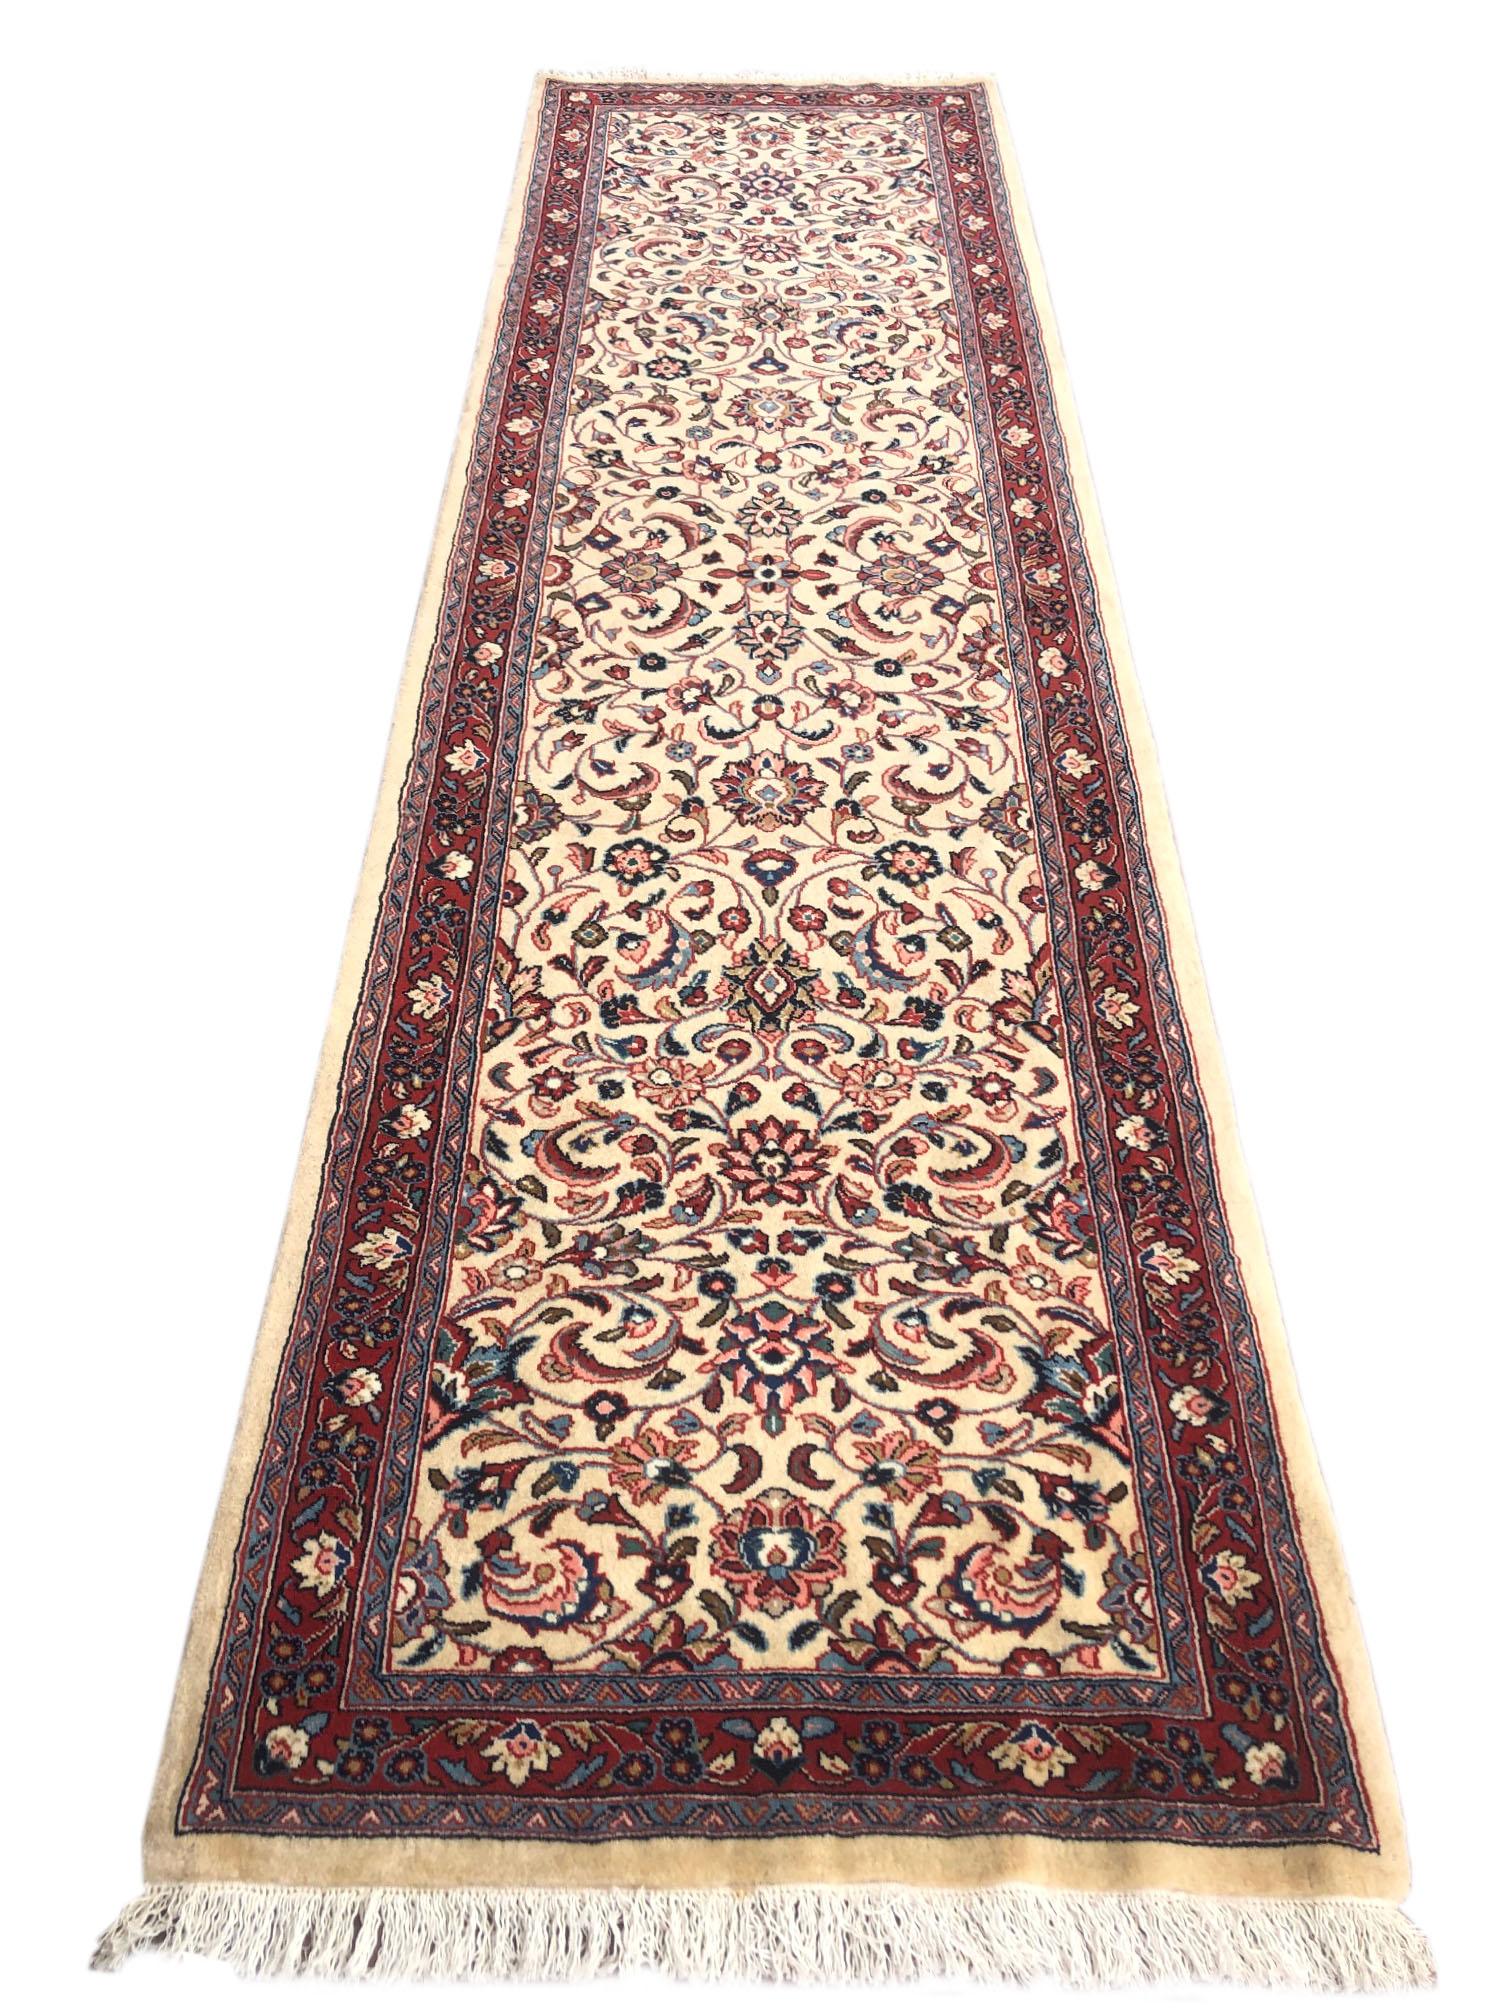 This runner is a hand knotted Sarouk rug with wool pile and cotton foundation. A Sarouk or Sarough rug is a type of Persian rug from Markazi Province in Iran and they are among fine selections among Persian rug market. The design is this beautiful